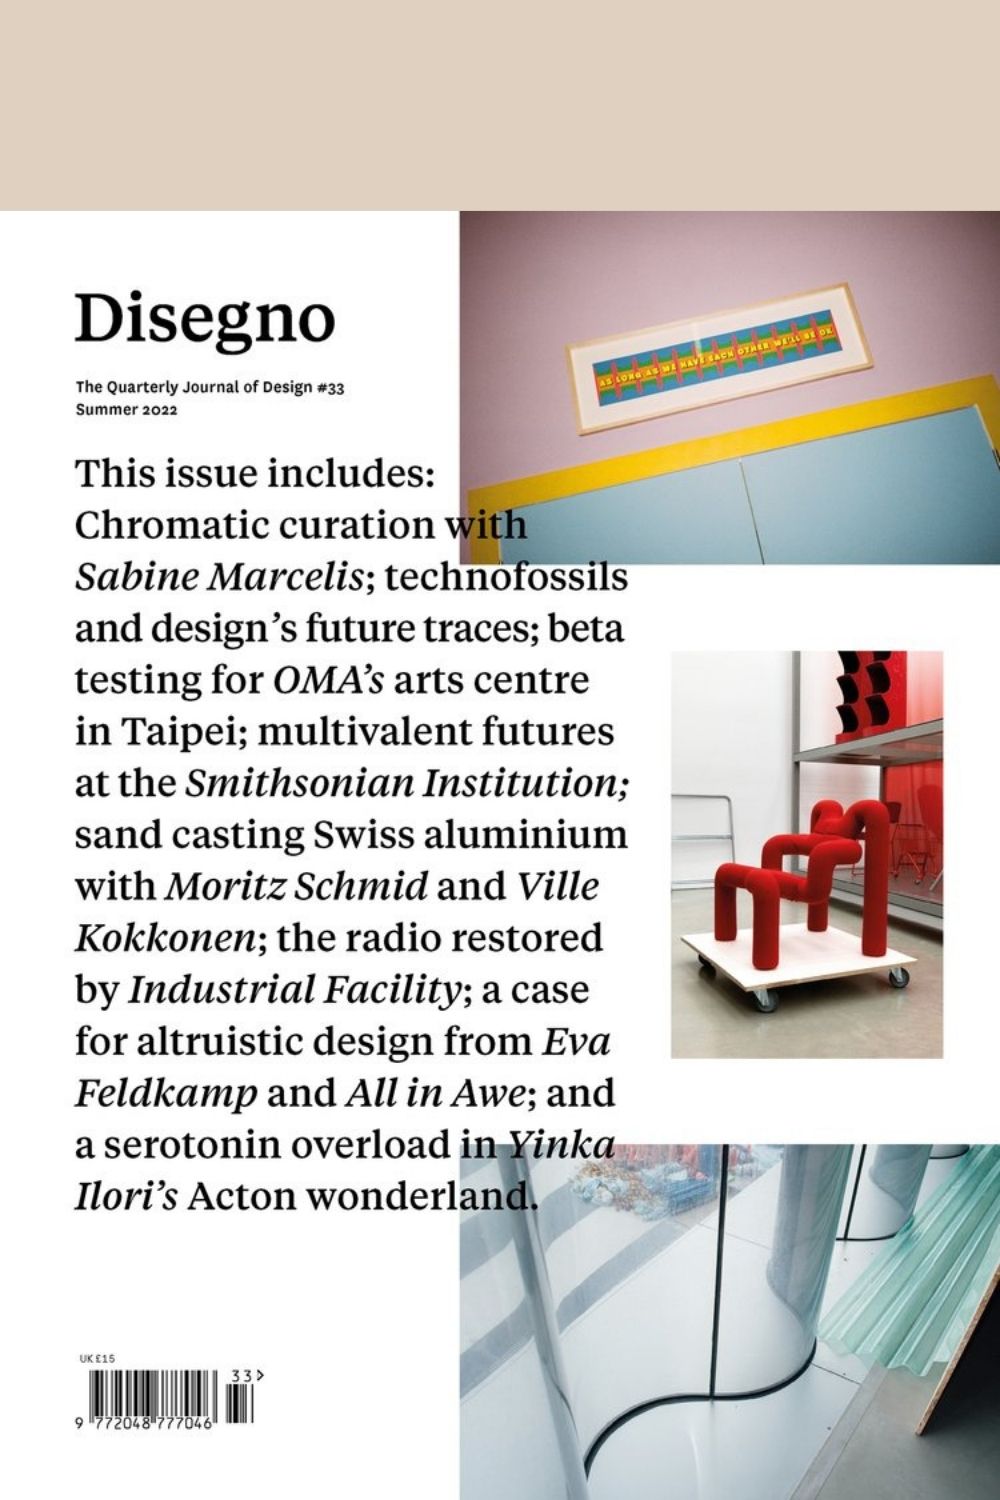 Disegno Journal Issue 33